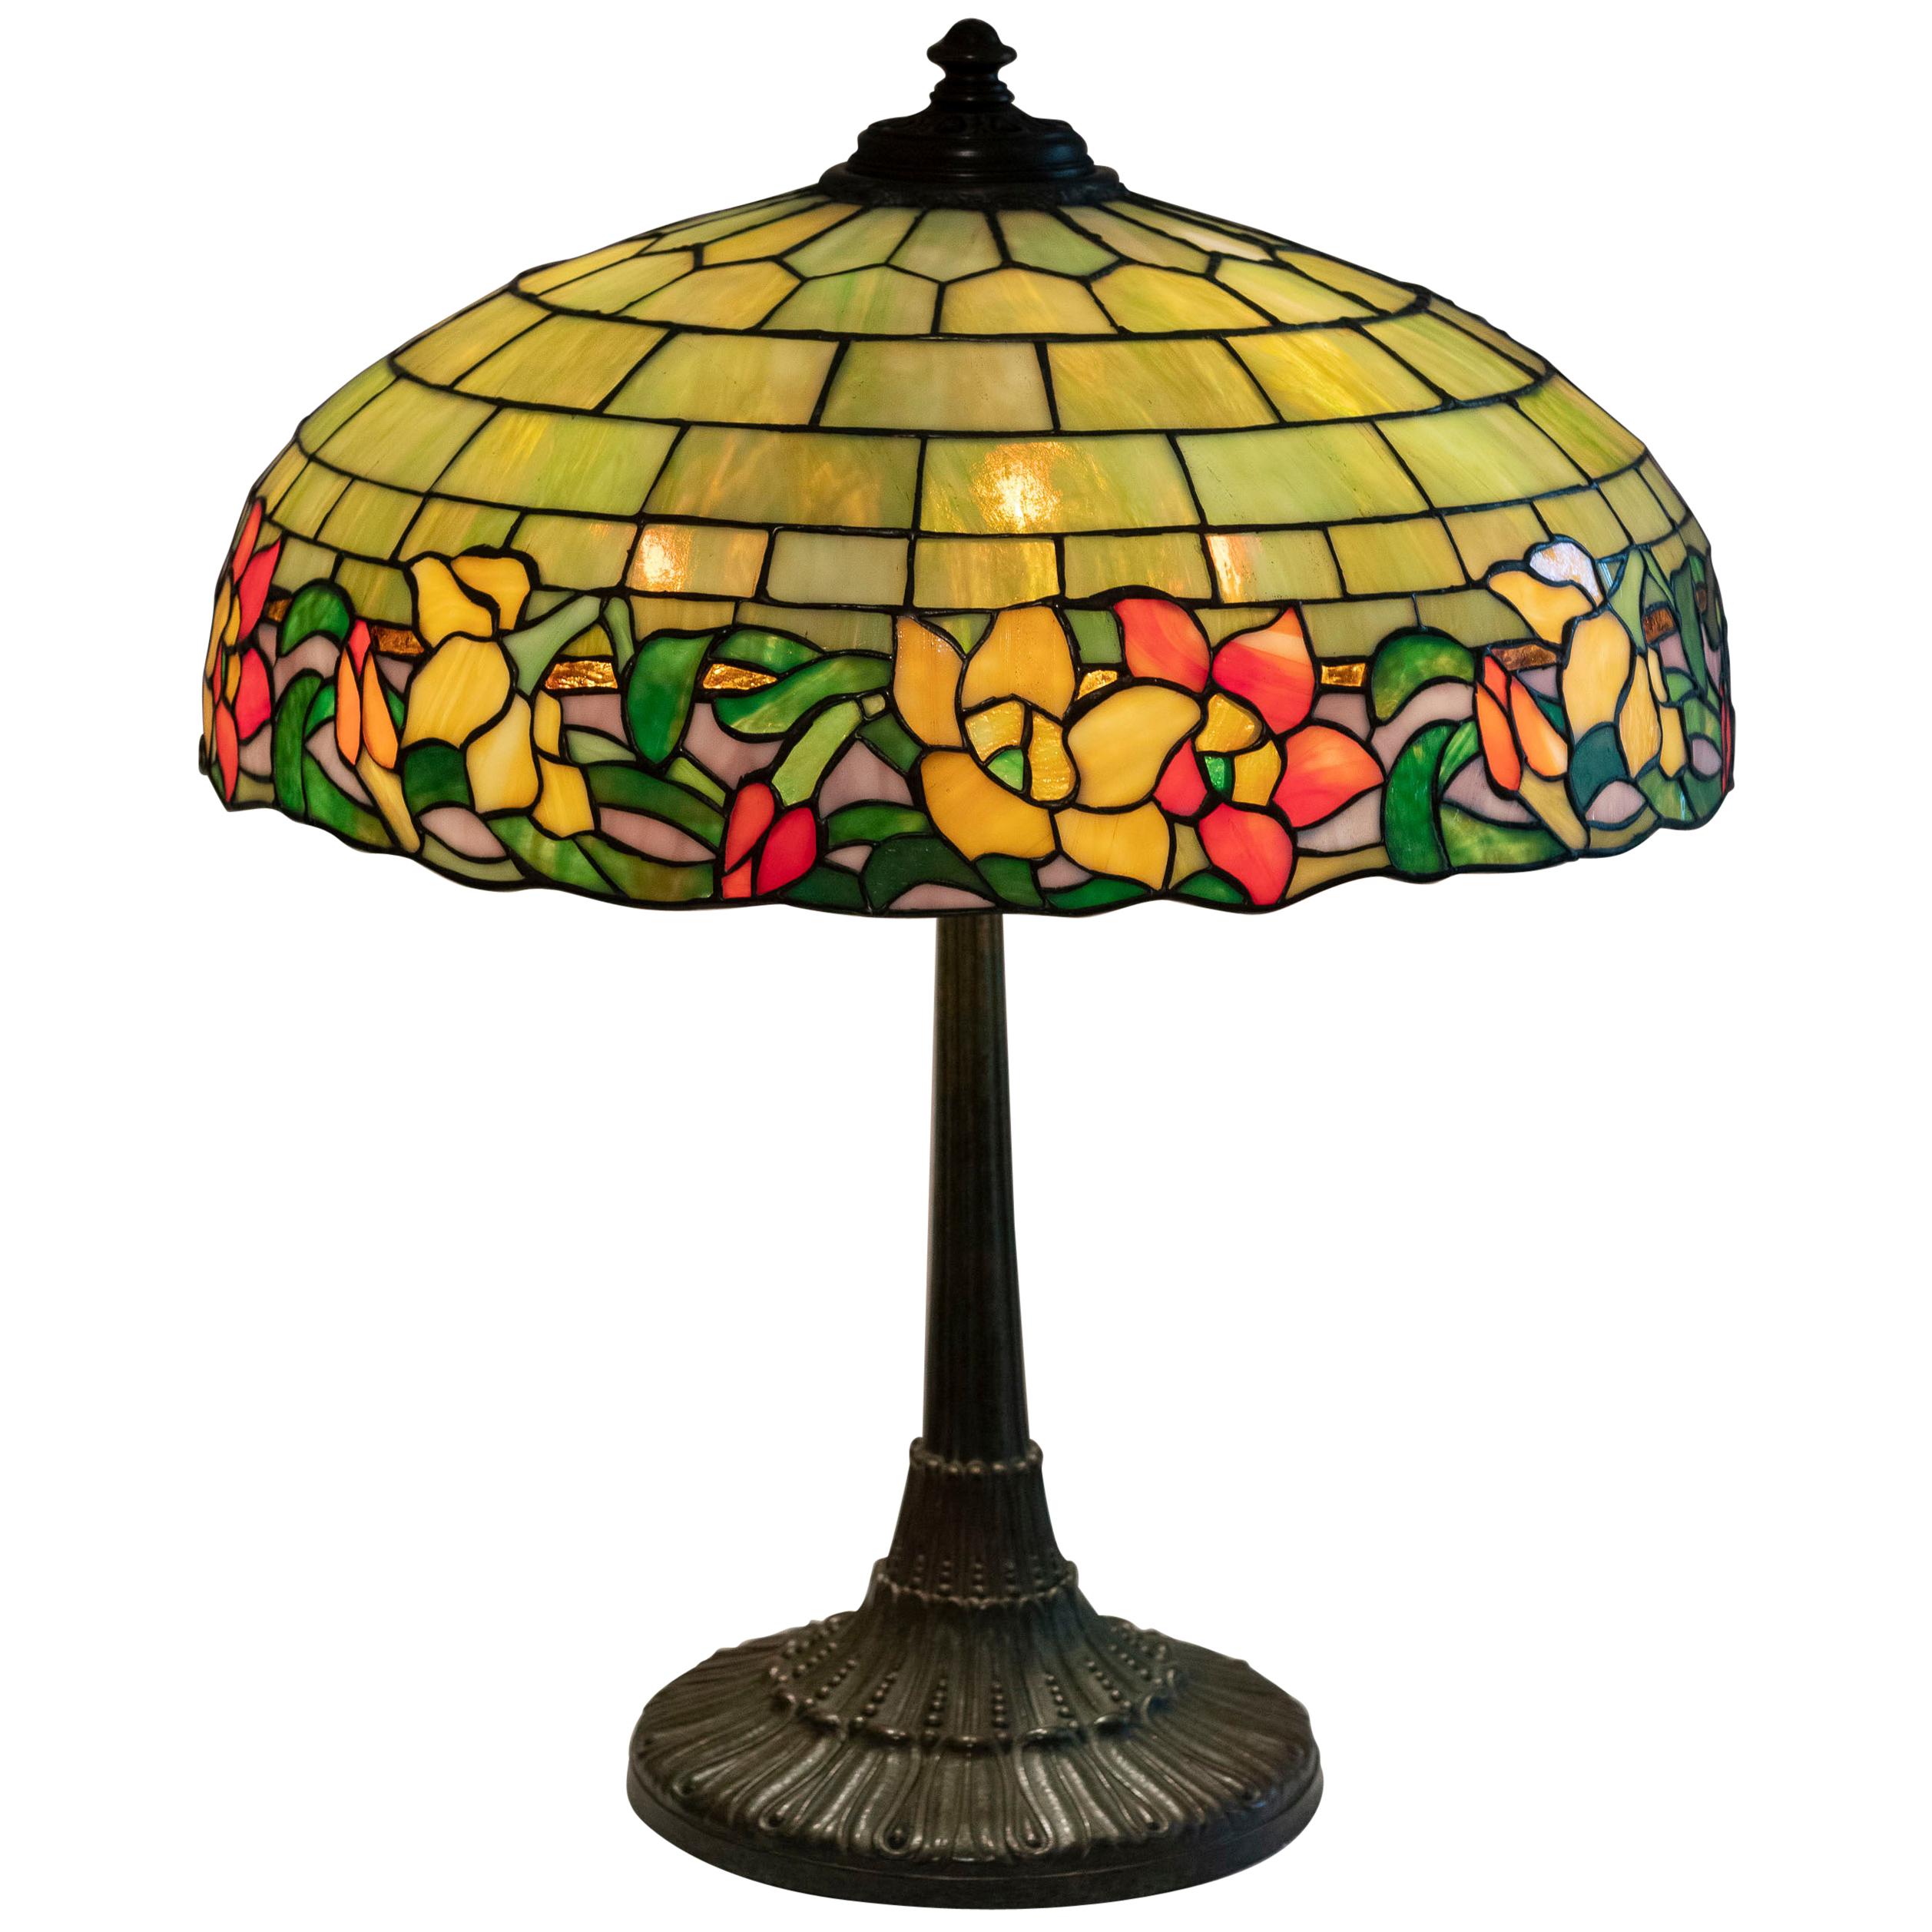 American Leaded Glass Table Lamp by Wilkinson, circa 1910